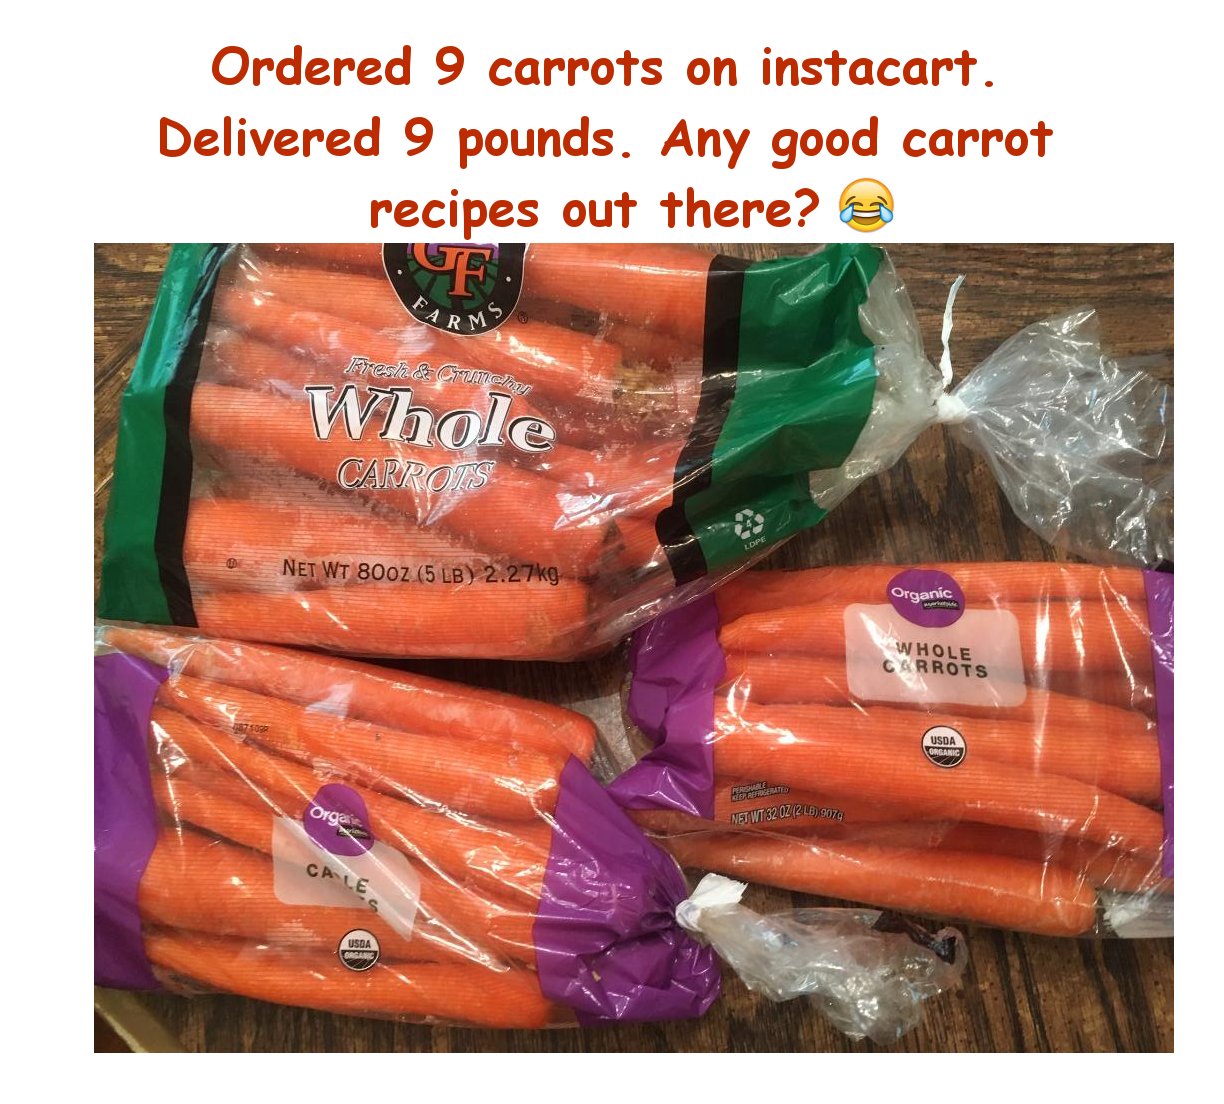 best birthday cards - Ordered 9 carrots on instacart. Delivered 9 pounds. Any good carrot recipes out there? F Farms Frese crumena Whole Carrieste Lope Net Wt 800Z 5 Lb g. Organic 9 Whole Carrots Usda Organic Berate Pha The Orga Net Wt 32 Oz 218 9076 Cale